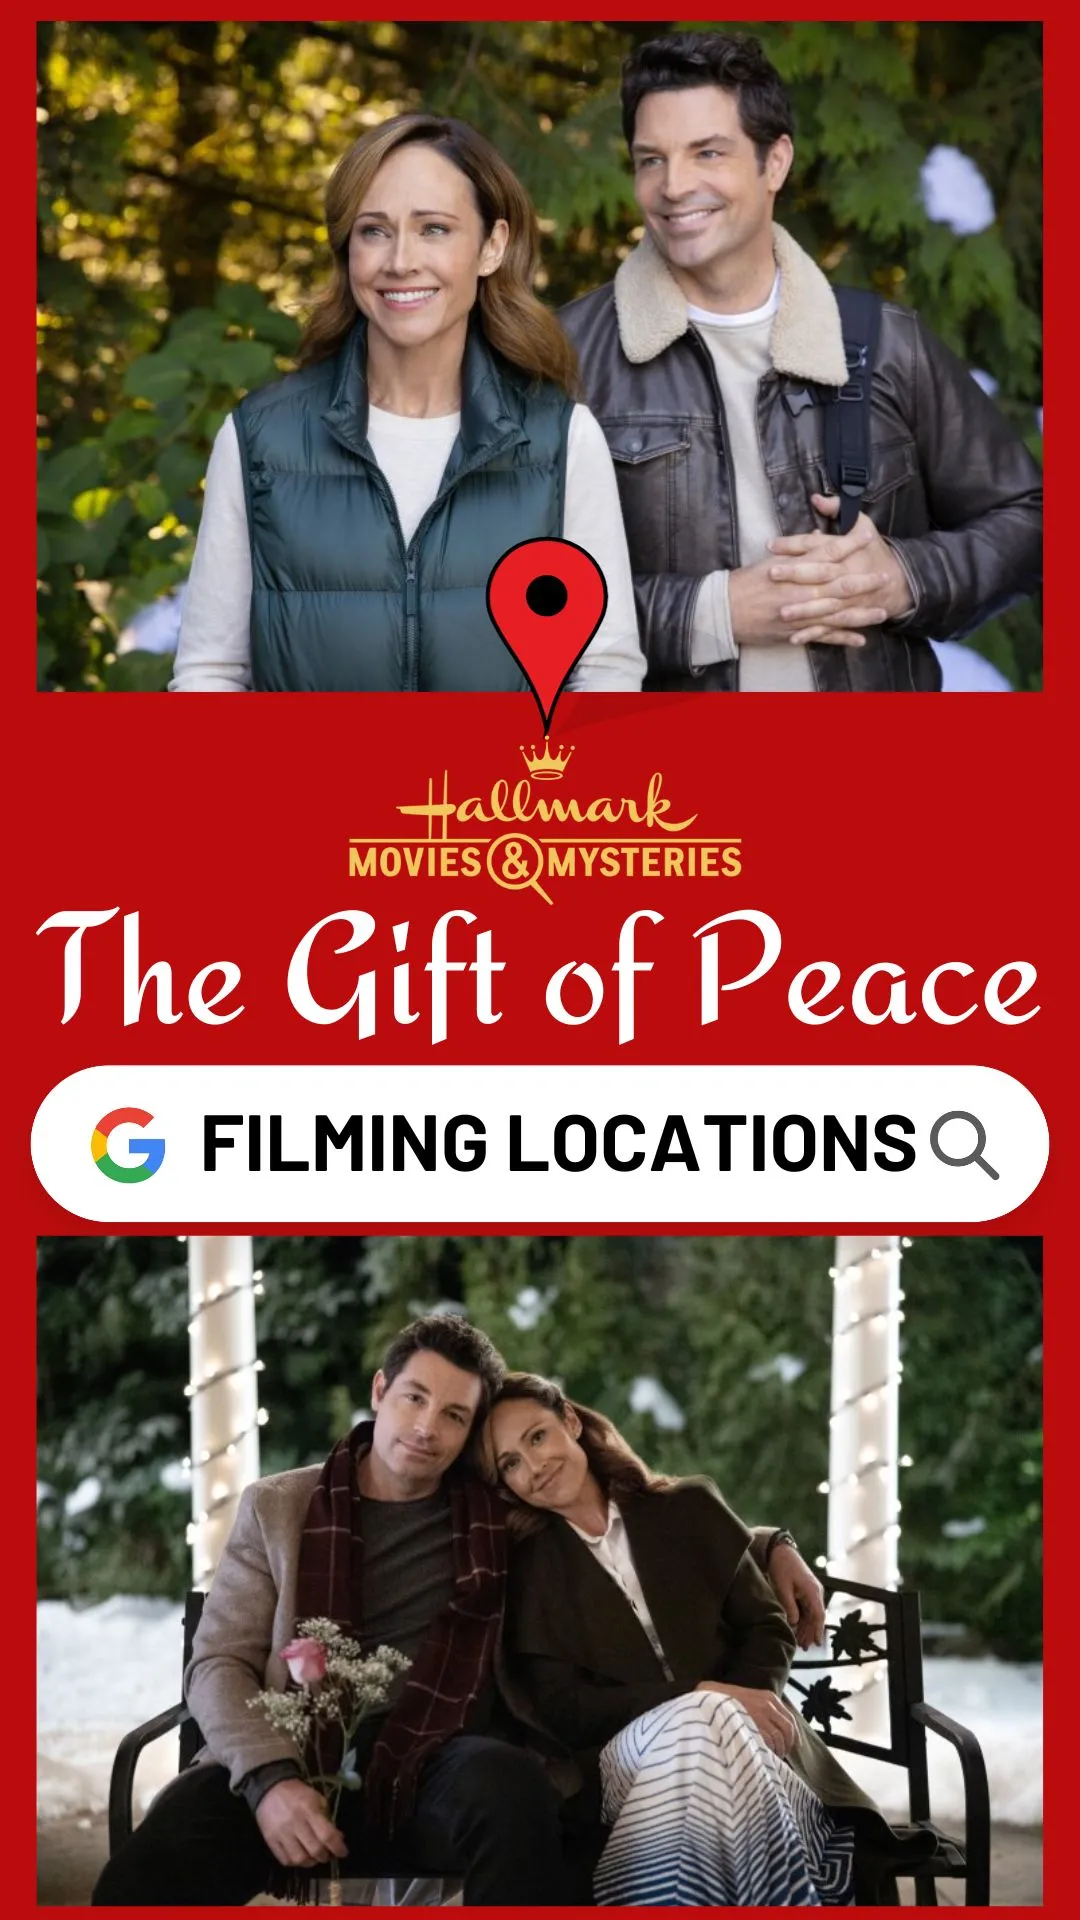 The Gift of Peace Filming Locations